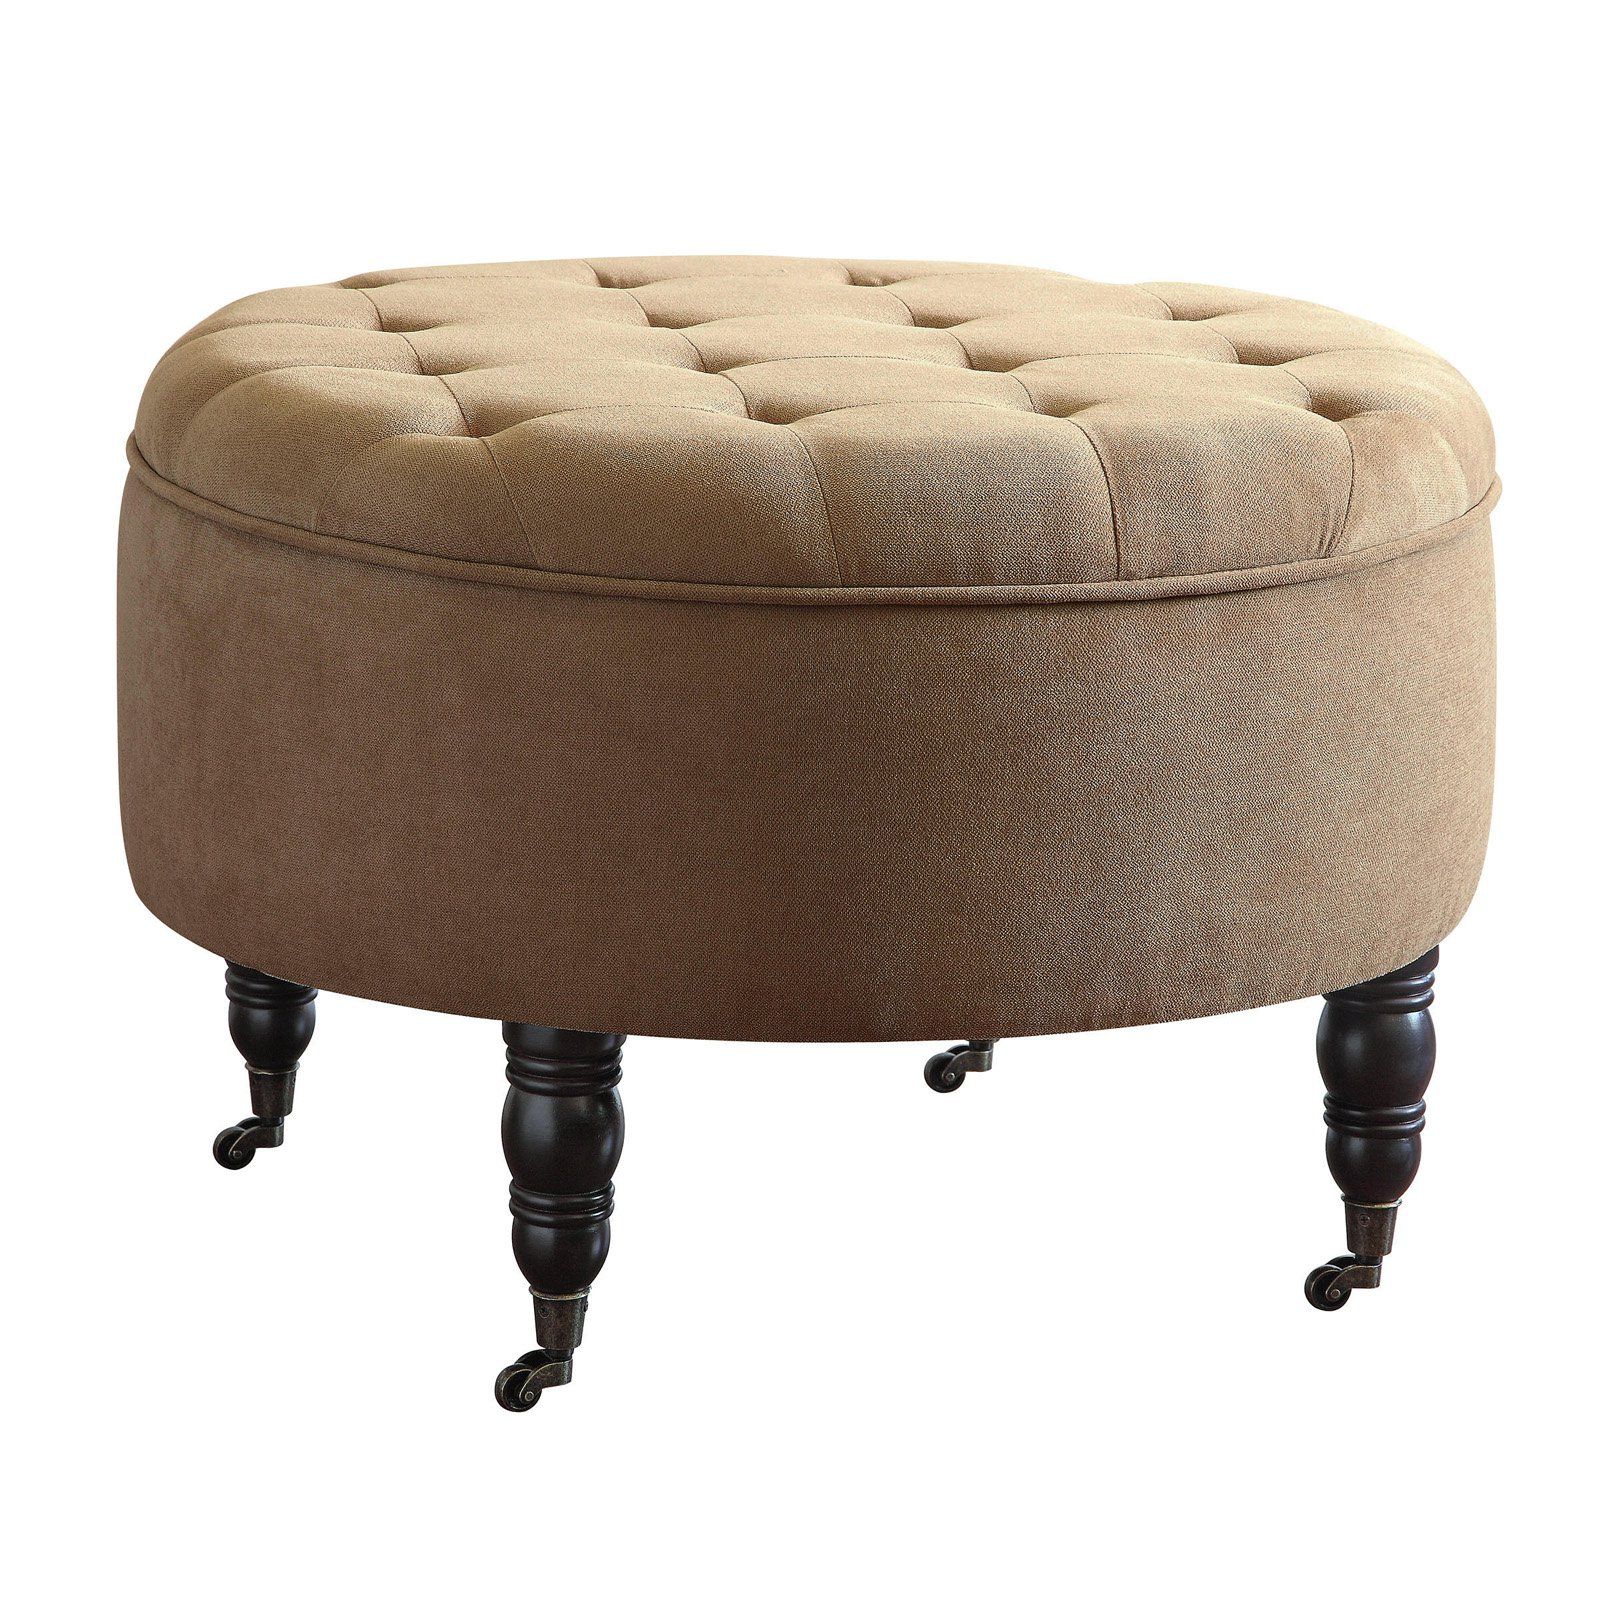 Elle Decor Quinn Round Tufted Ottoman With Storage And Casters Regarding Wool Round Pouf Ottomans (View 2 of 20)